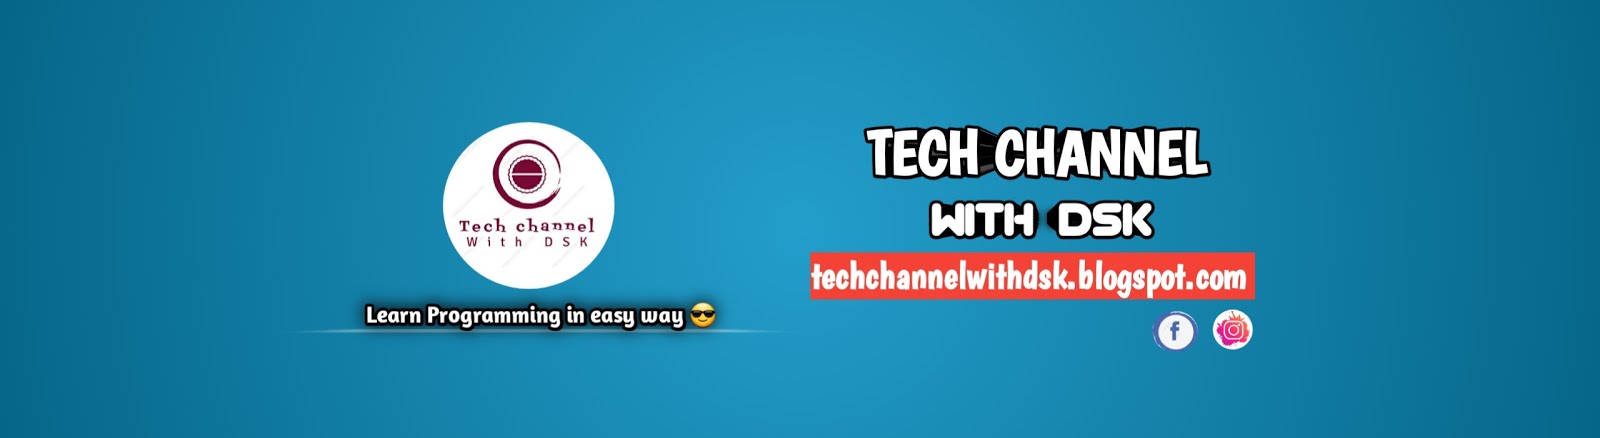 Tech channel with DSK